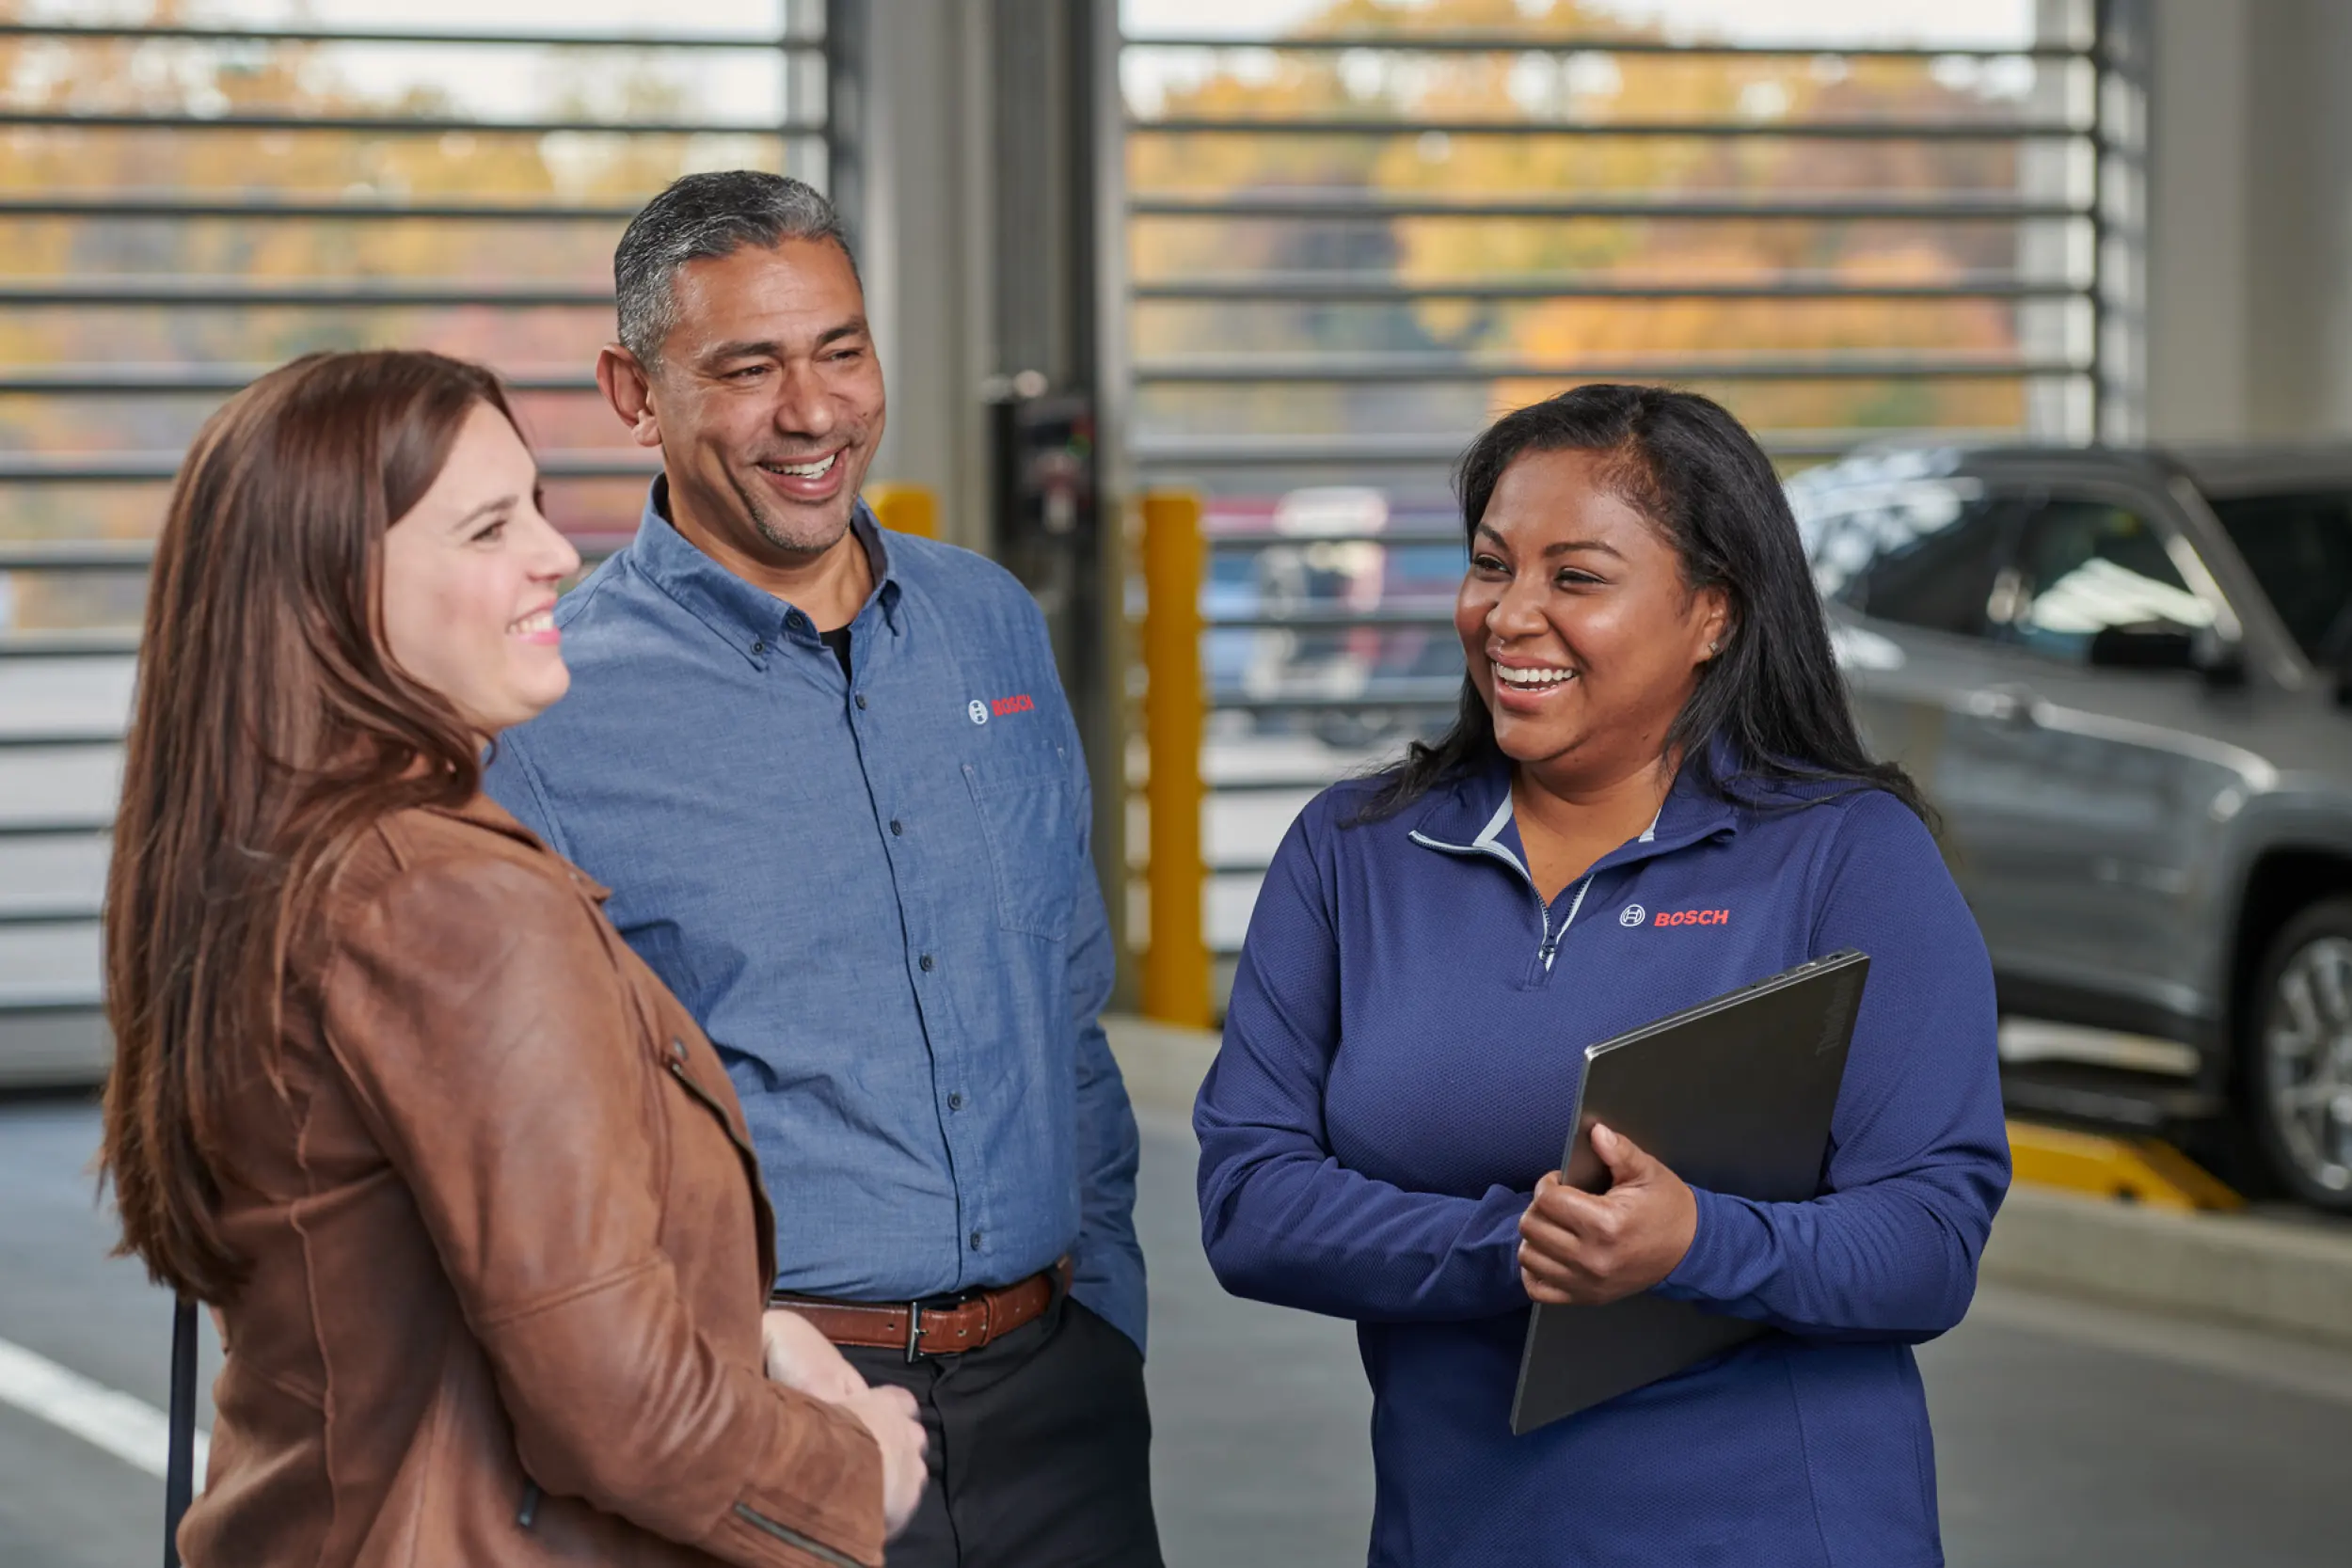 Bosch Auto Service team speaking with a customer after an auto repair appointment